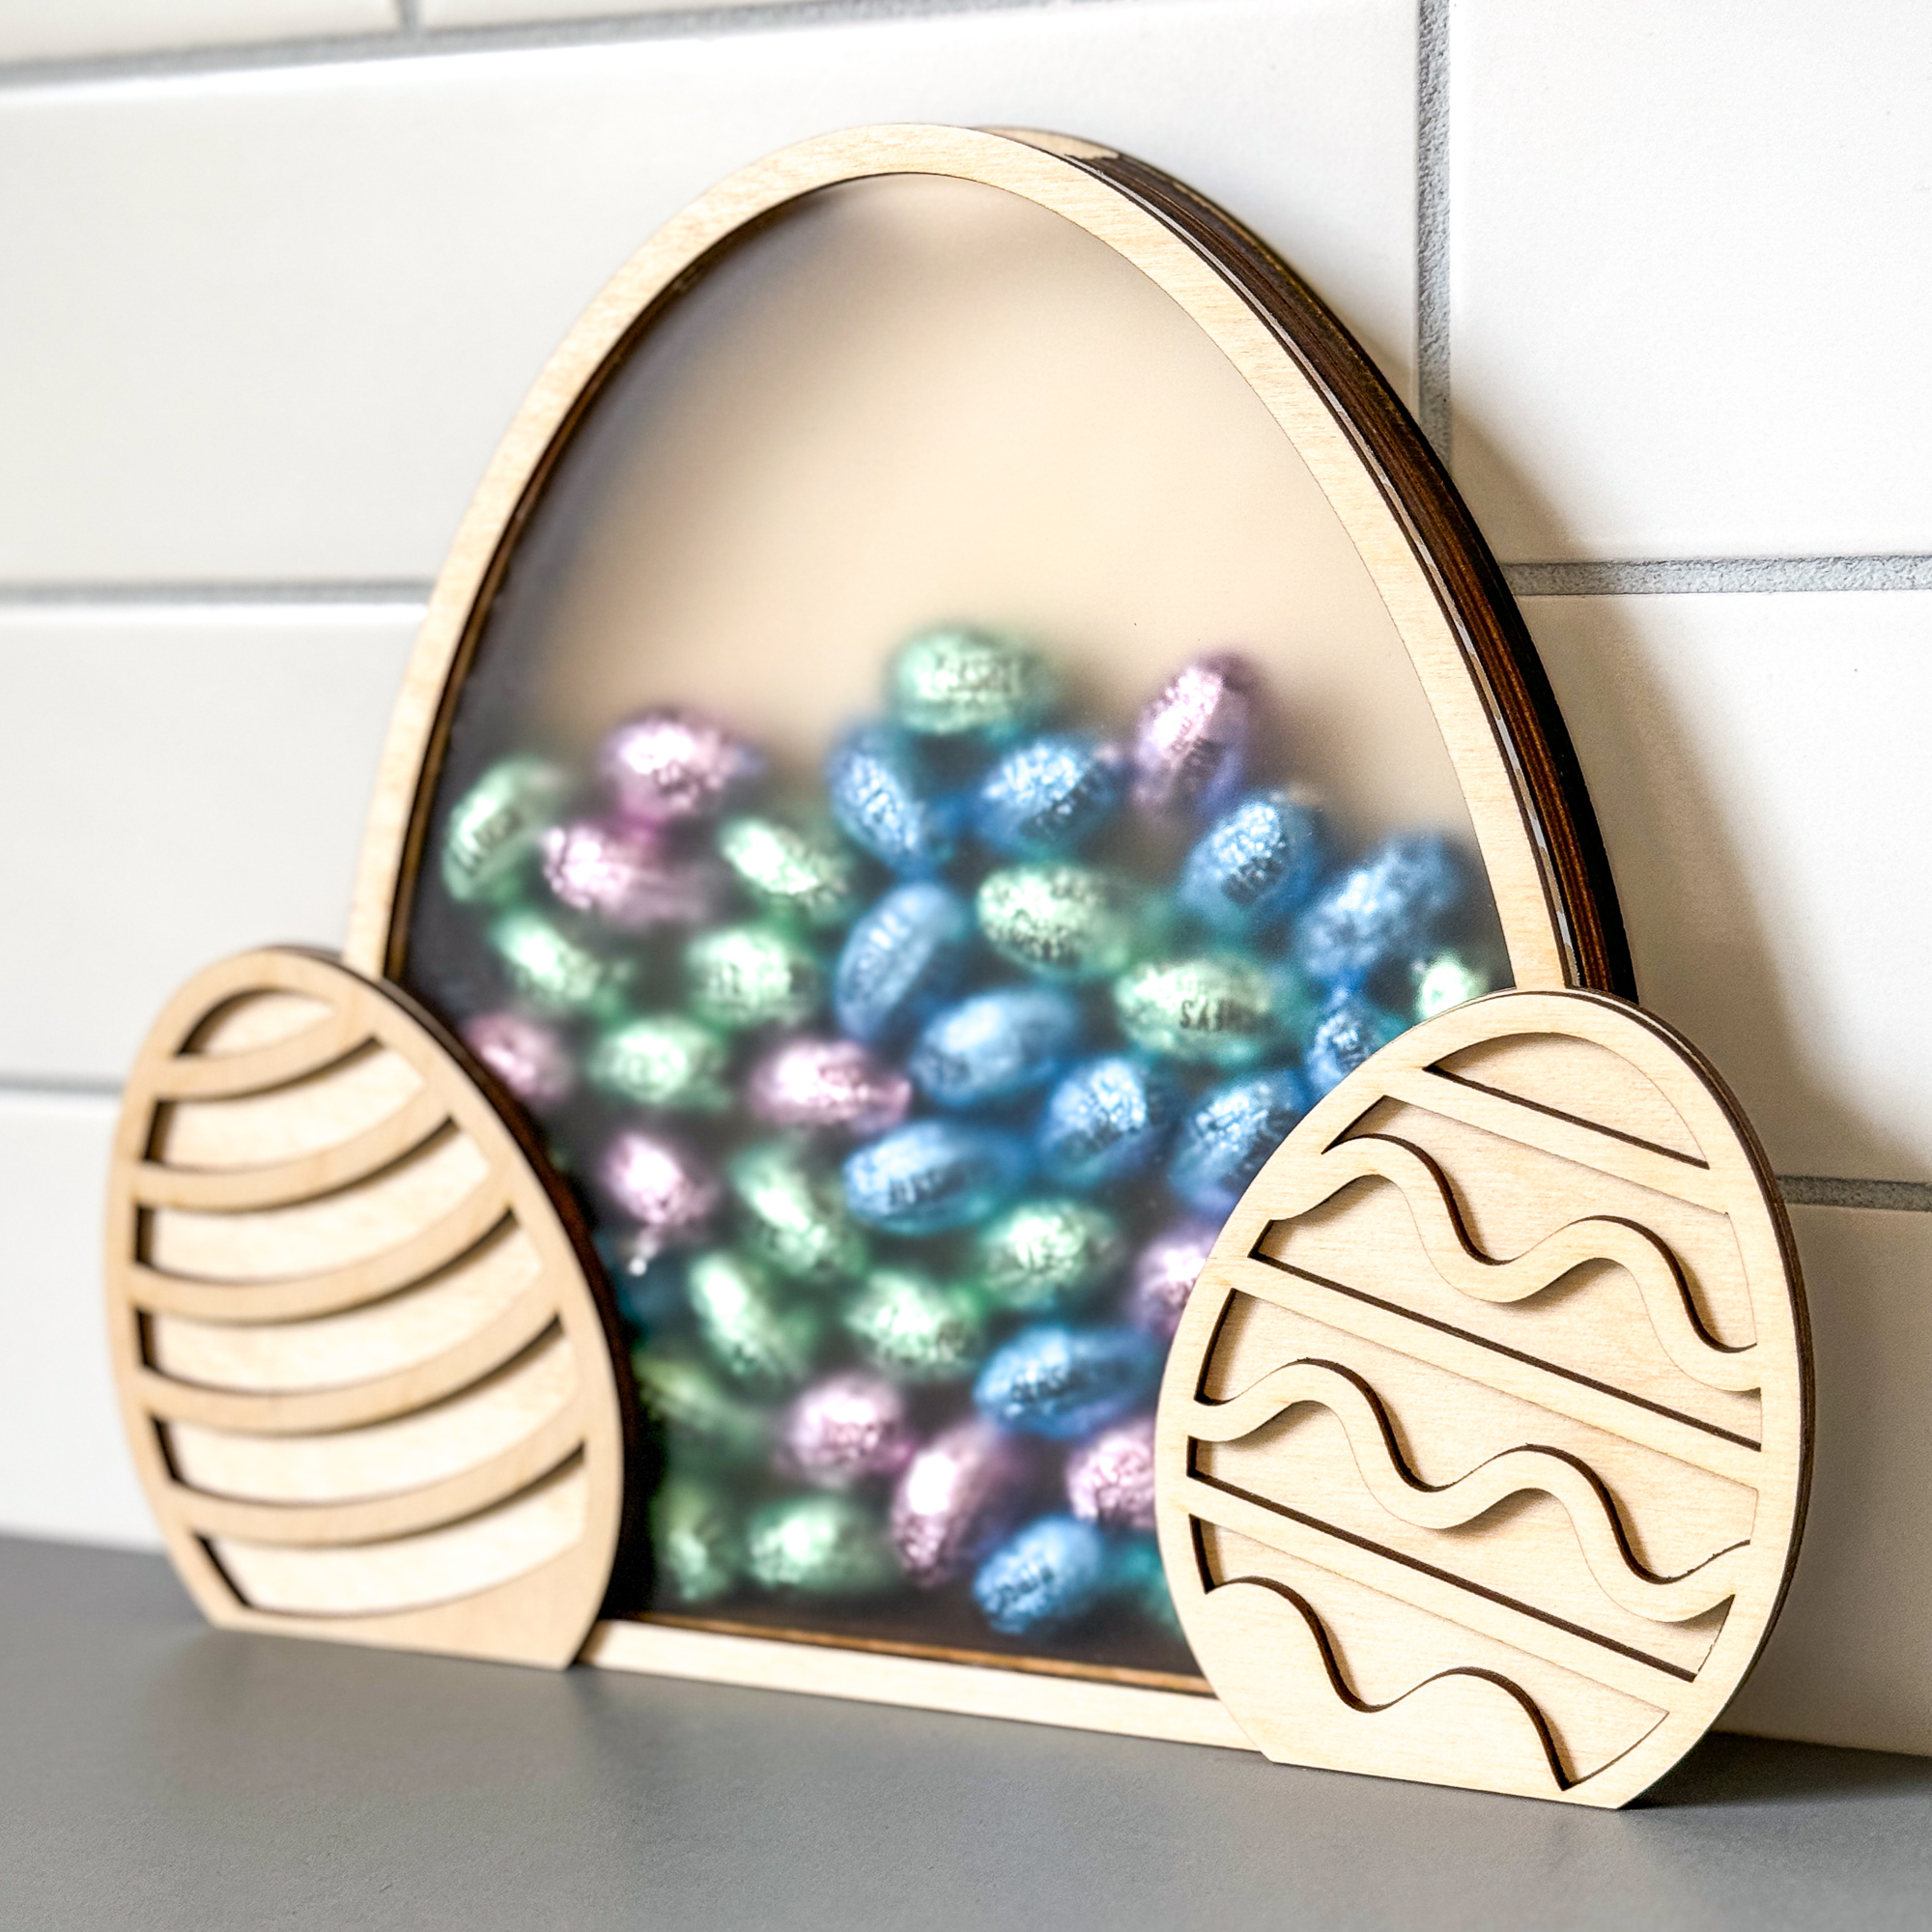 wood Easter candy holder with clear acrylic front in the shape of an Easter egg with Hershey chocolate eggs inside